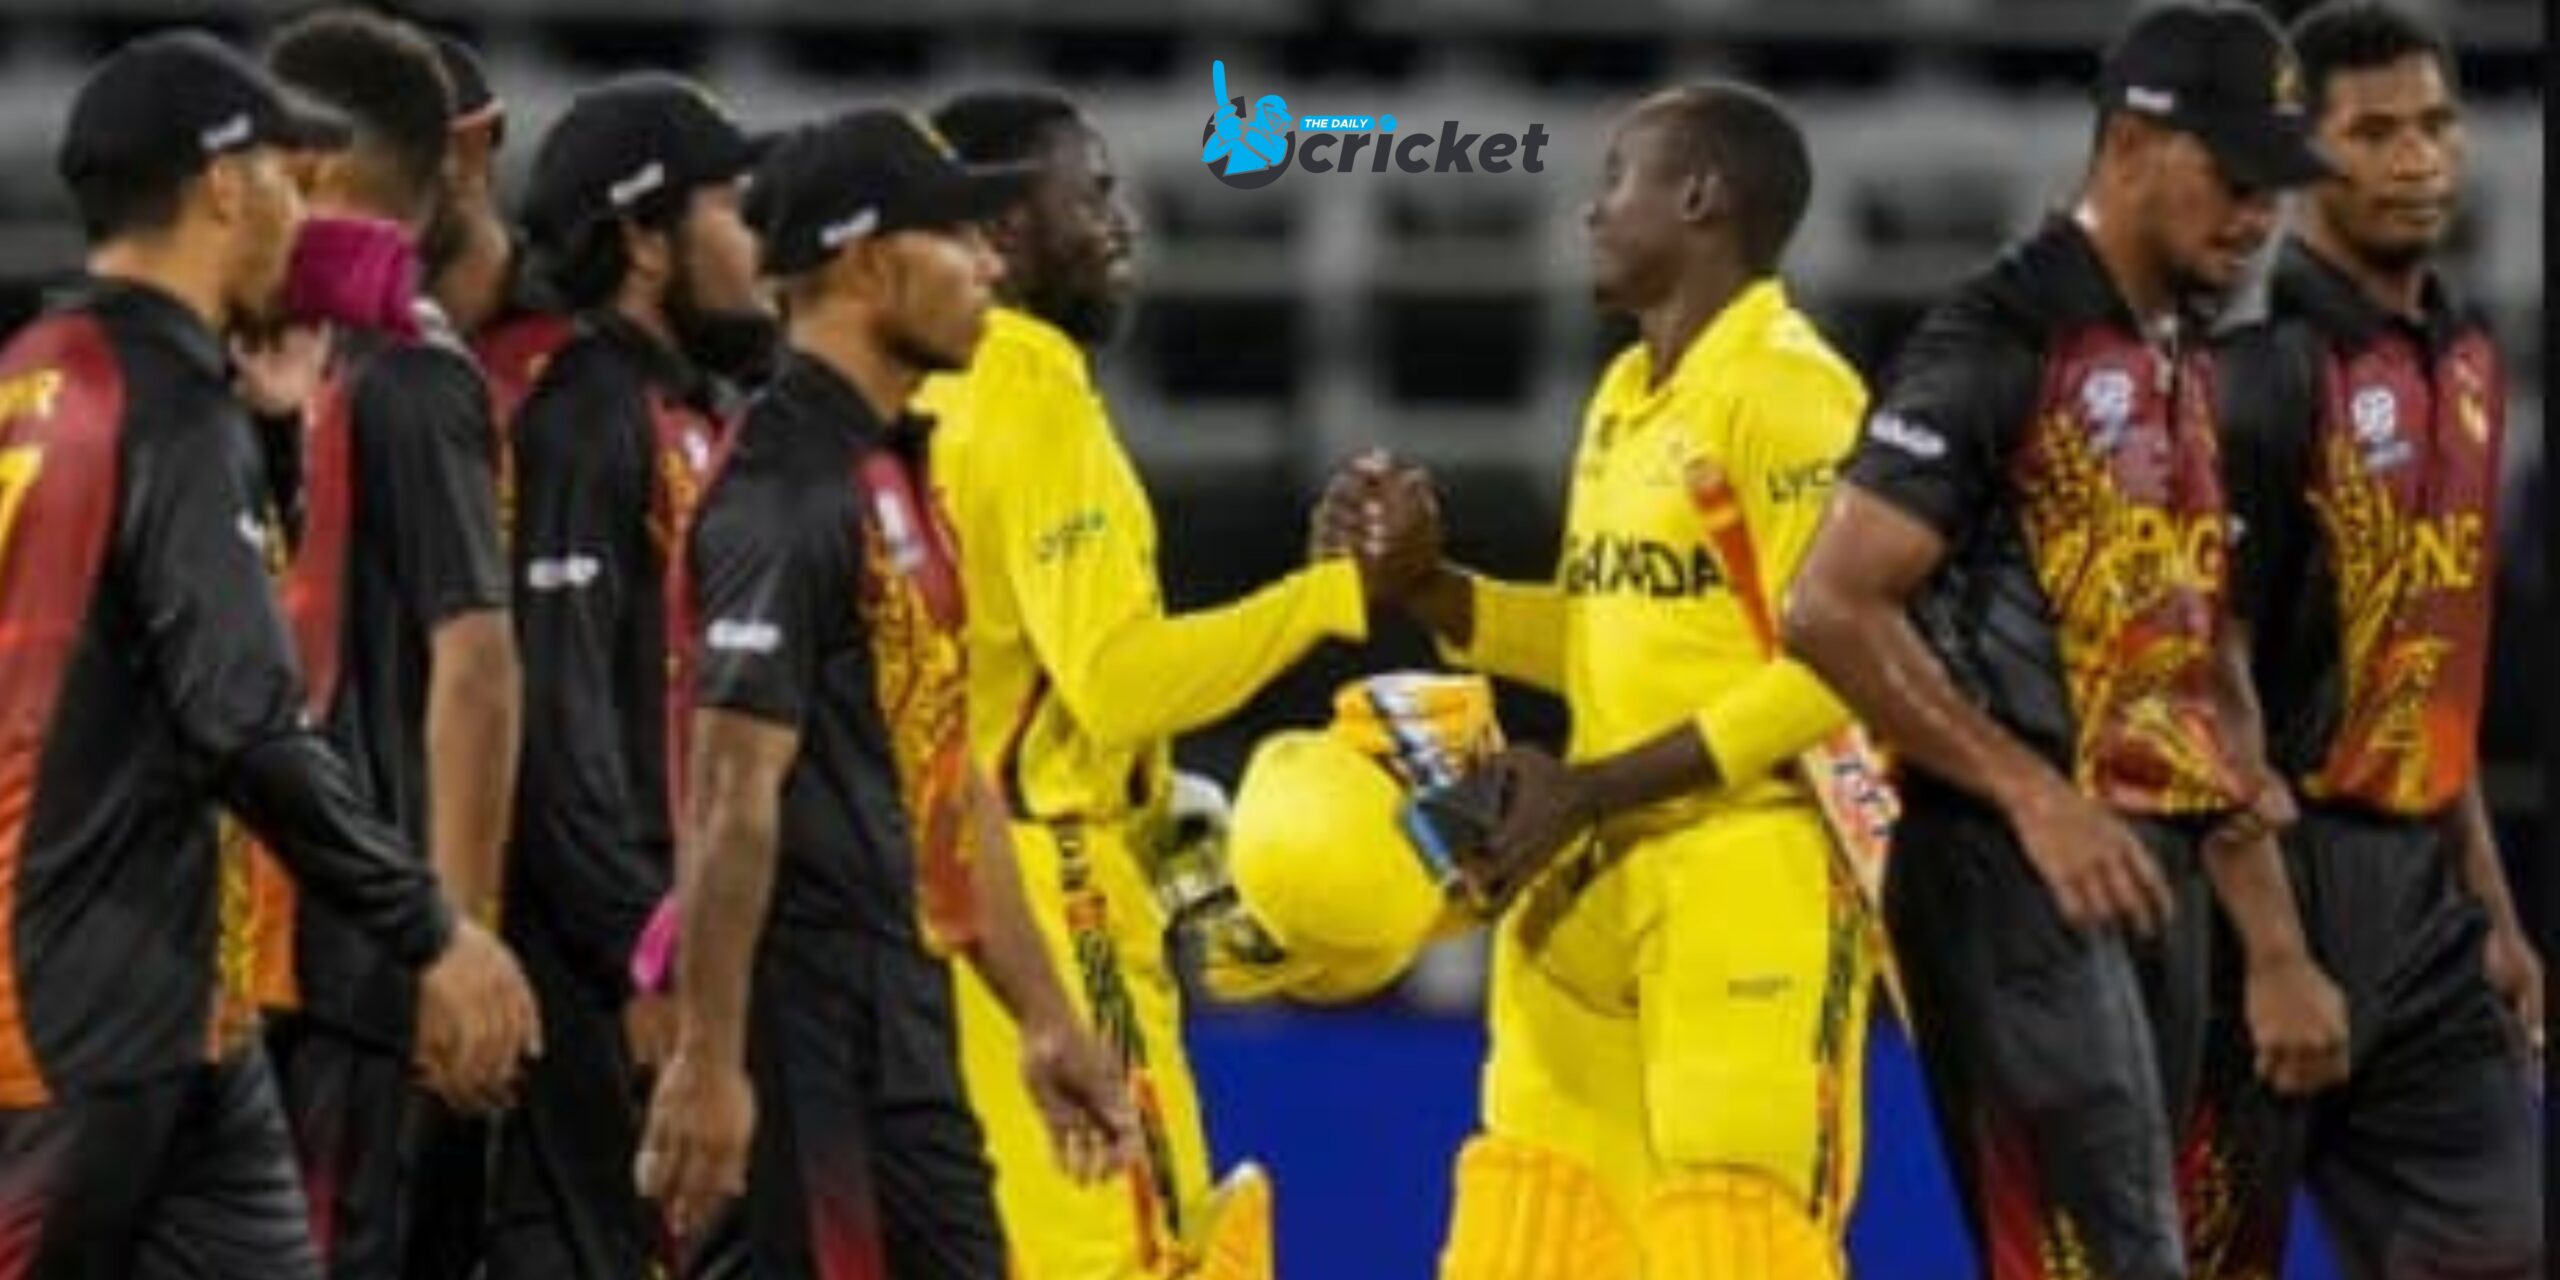 PNG Vs UGA Full Match Highlights: Uganda Secured Thrilling 3-Wicket Victory Against Papua New Guinea